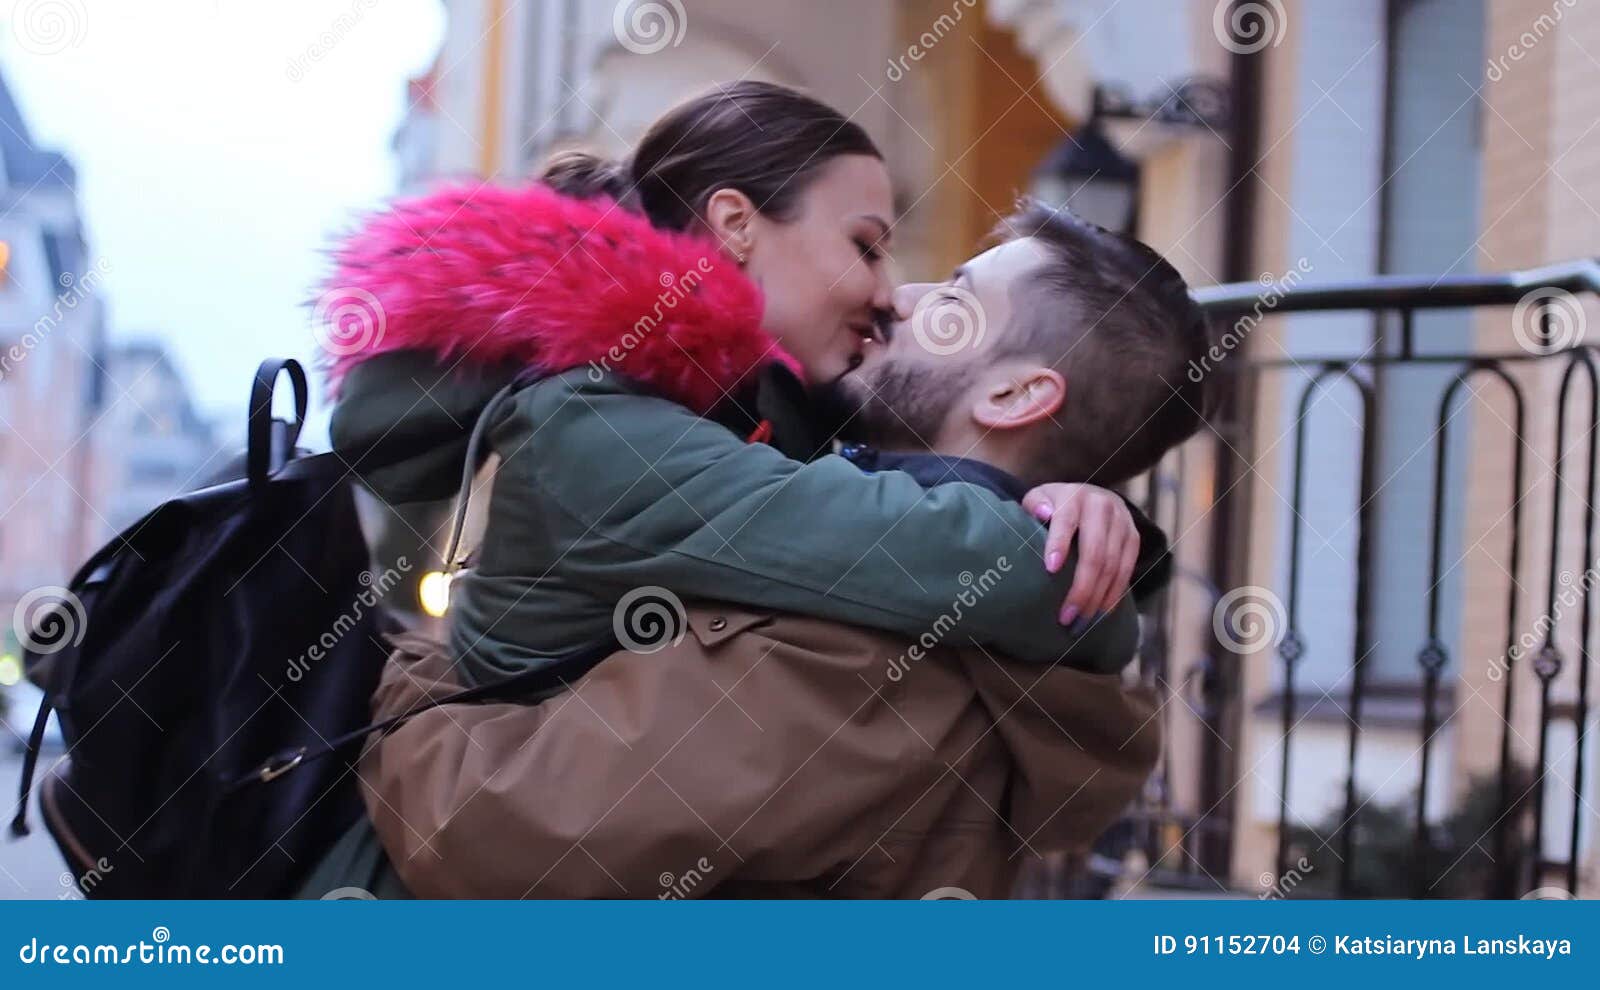 Old Man Kiss Girl Stock Footage and Videos